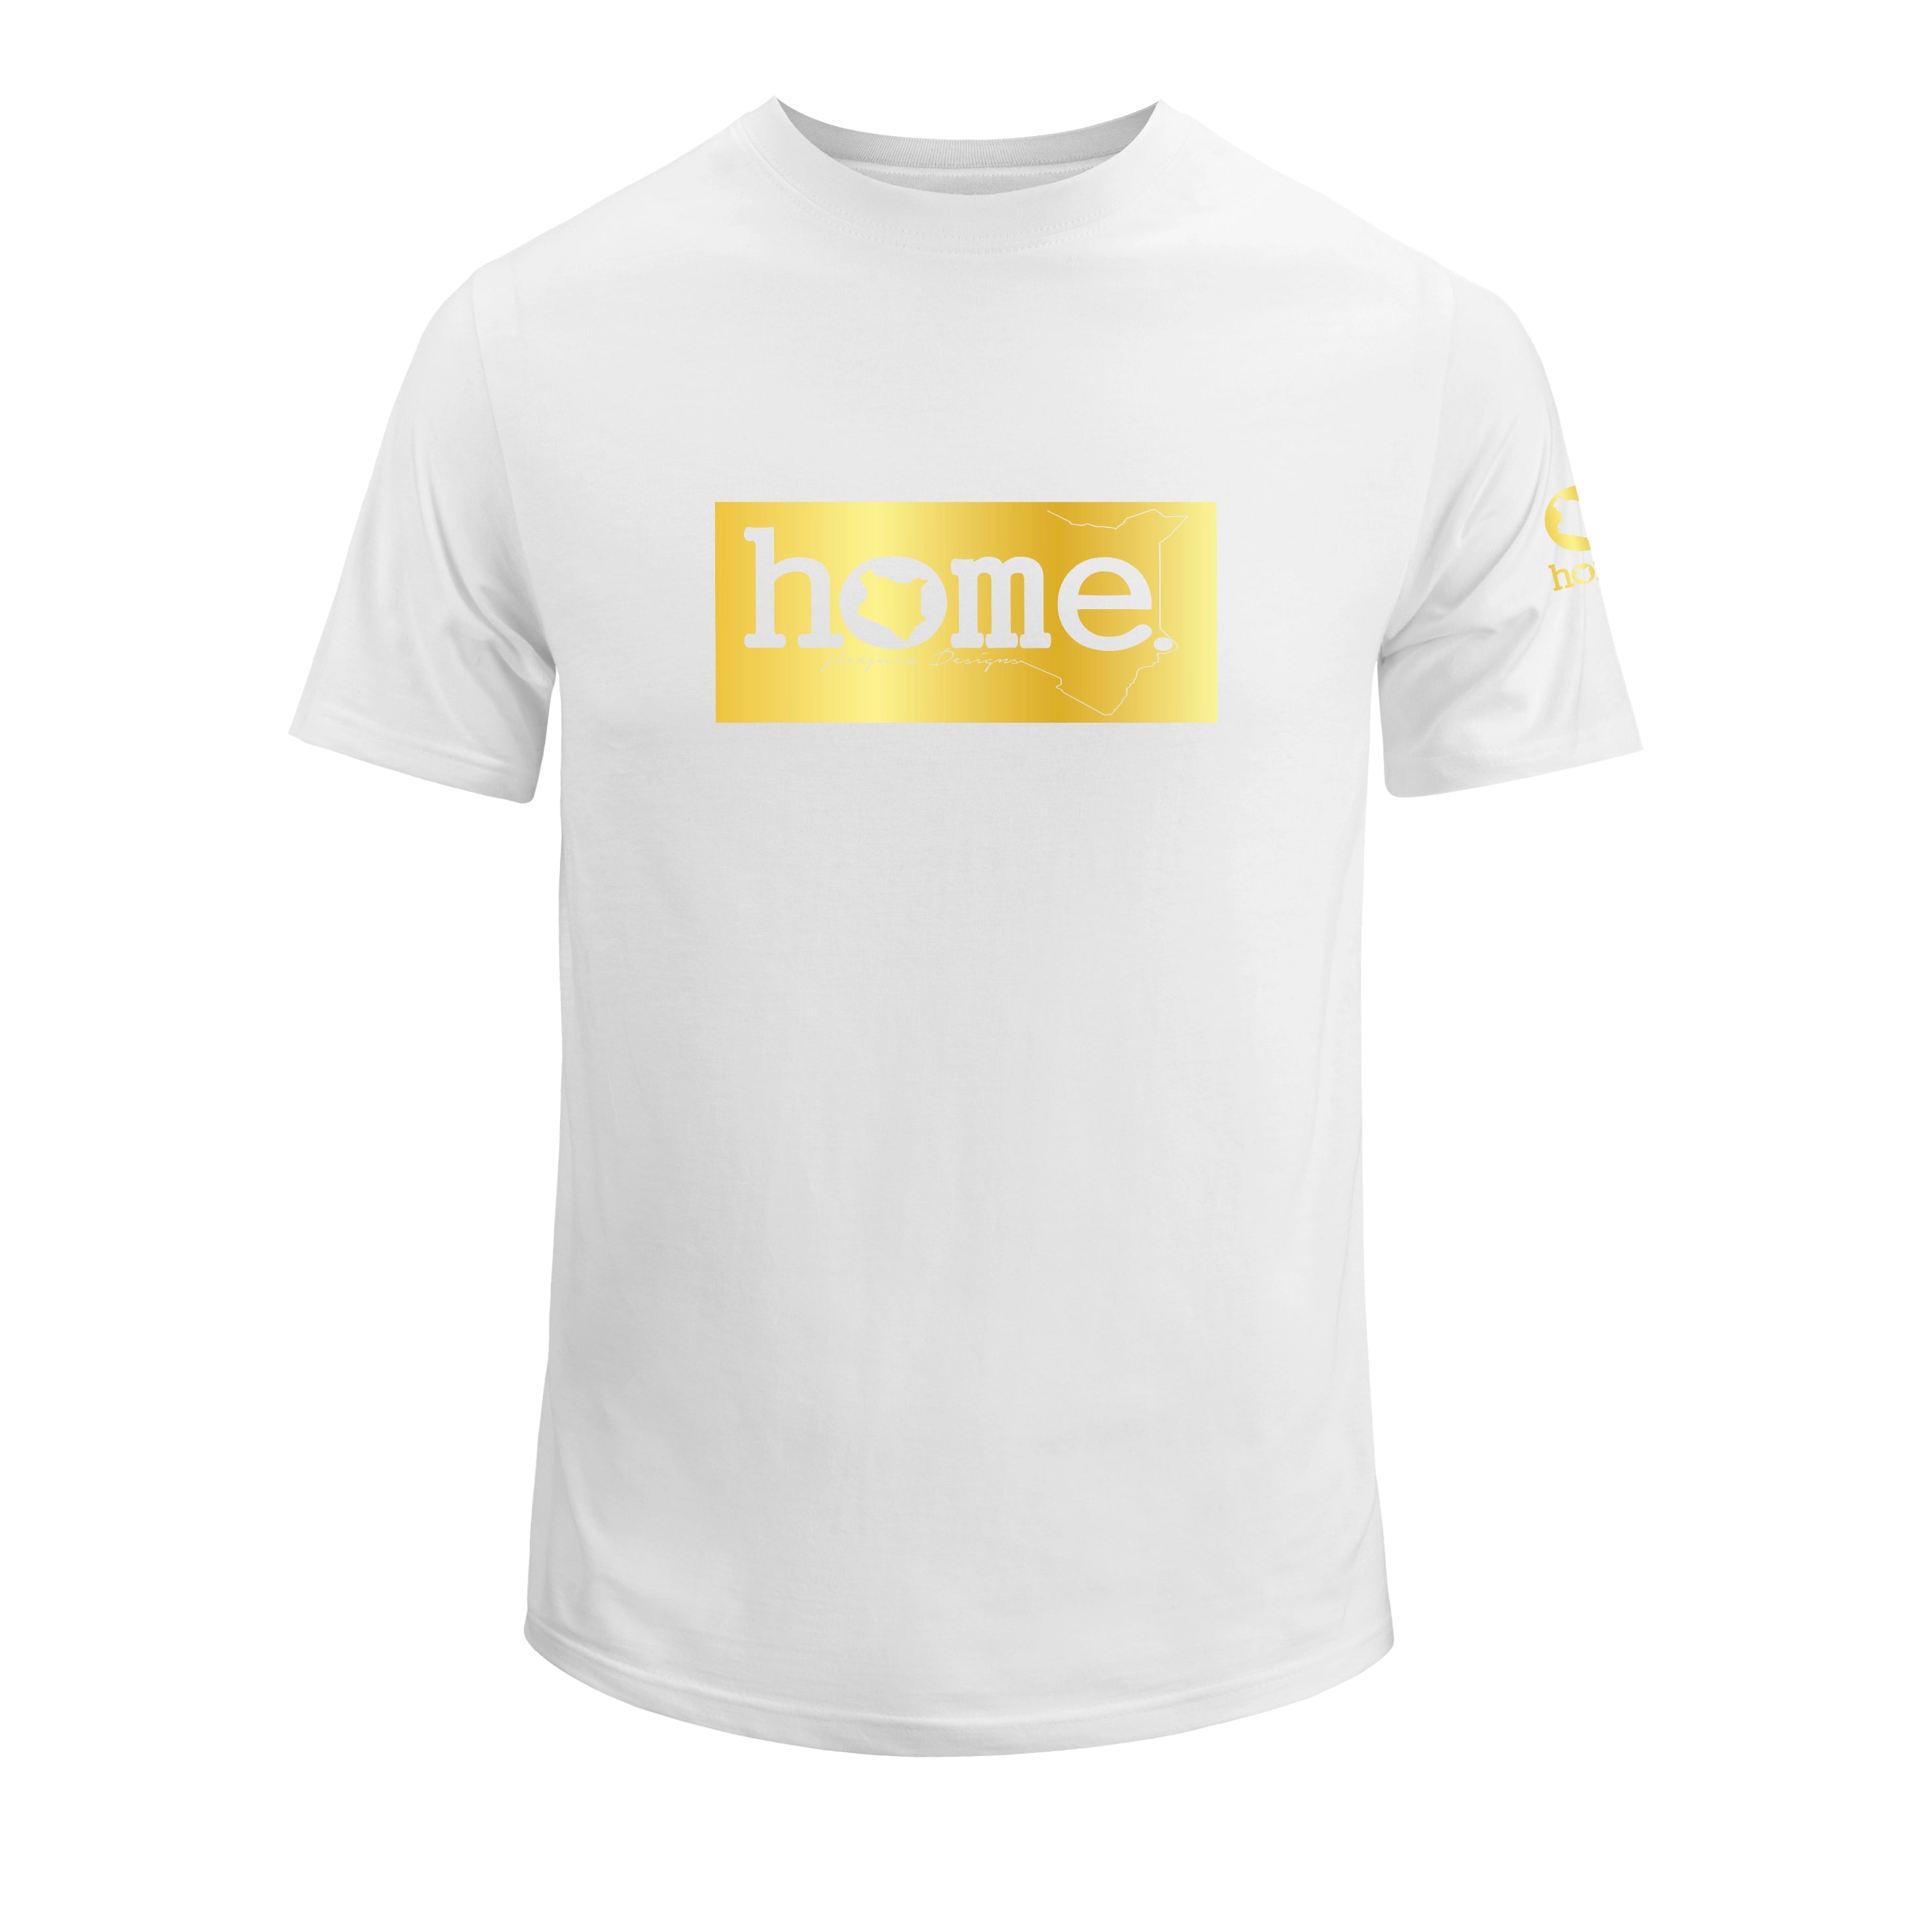 home_254 KIDS SHORT-SLEEVED WHITE T-SHIRT WITH A GOLD CLASSIC PRINT – COTTON PLUS FABRIC